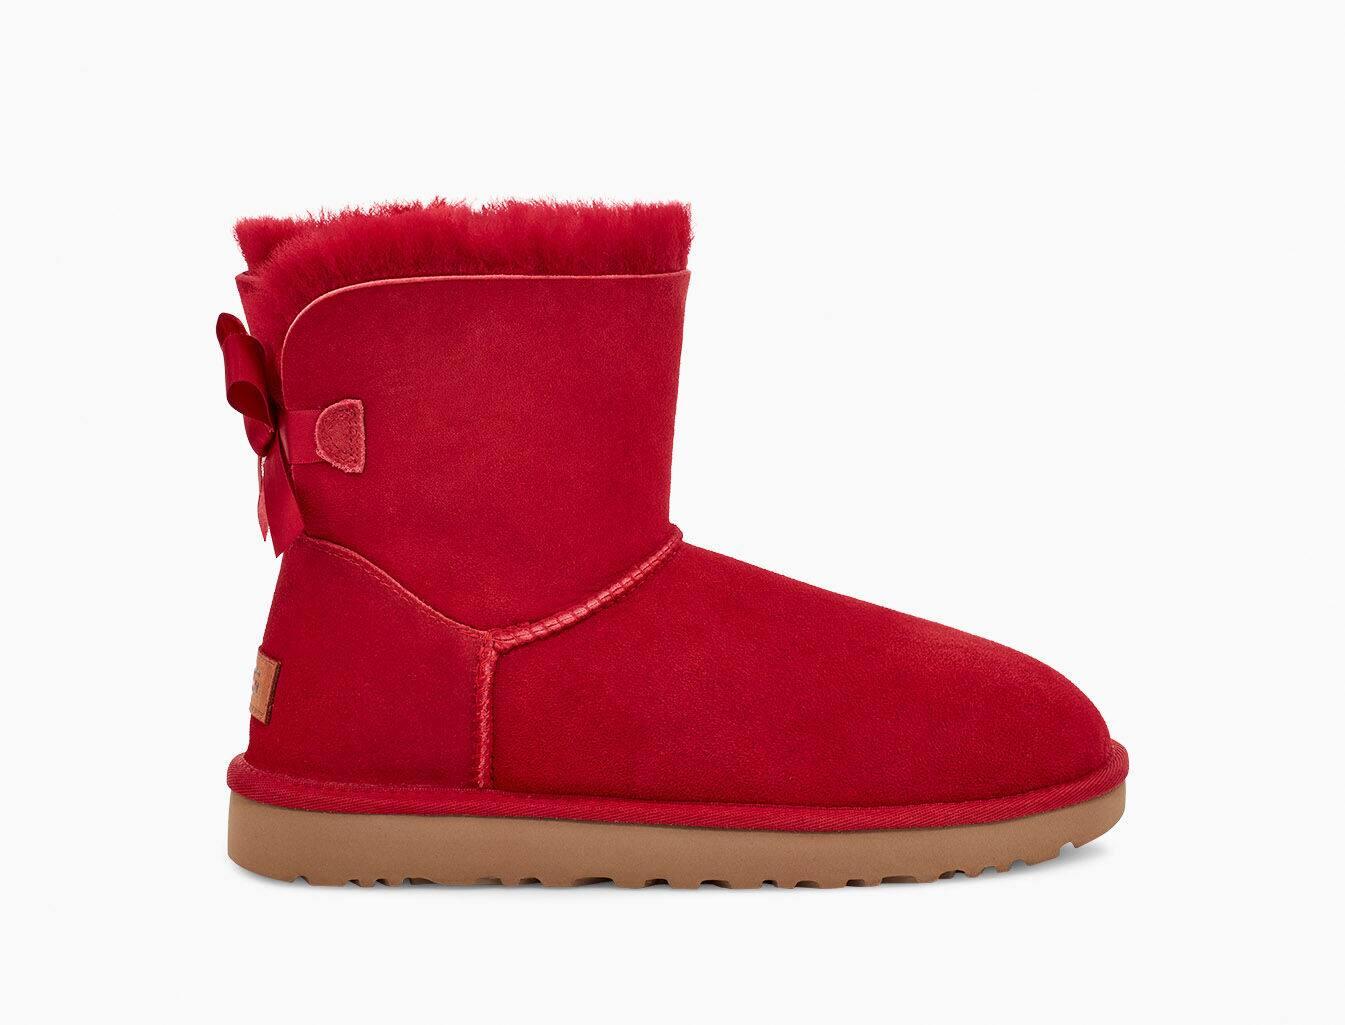 UGG Satin Mini Bailey Bow Ii Boot in Red - Lyst